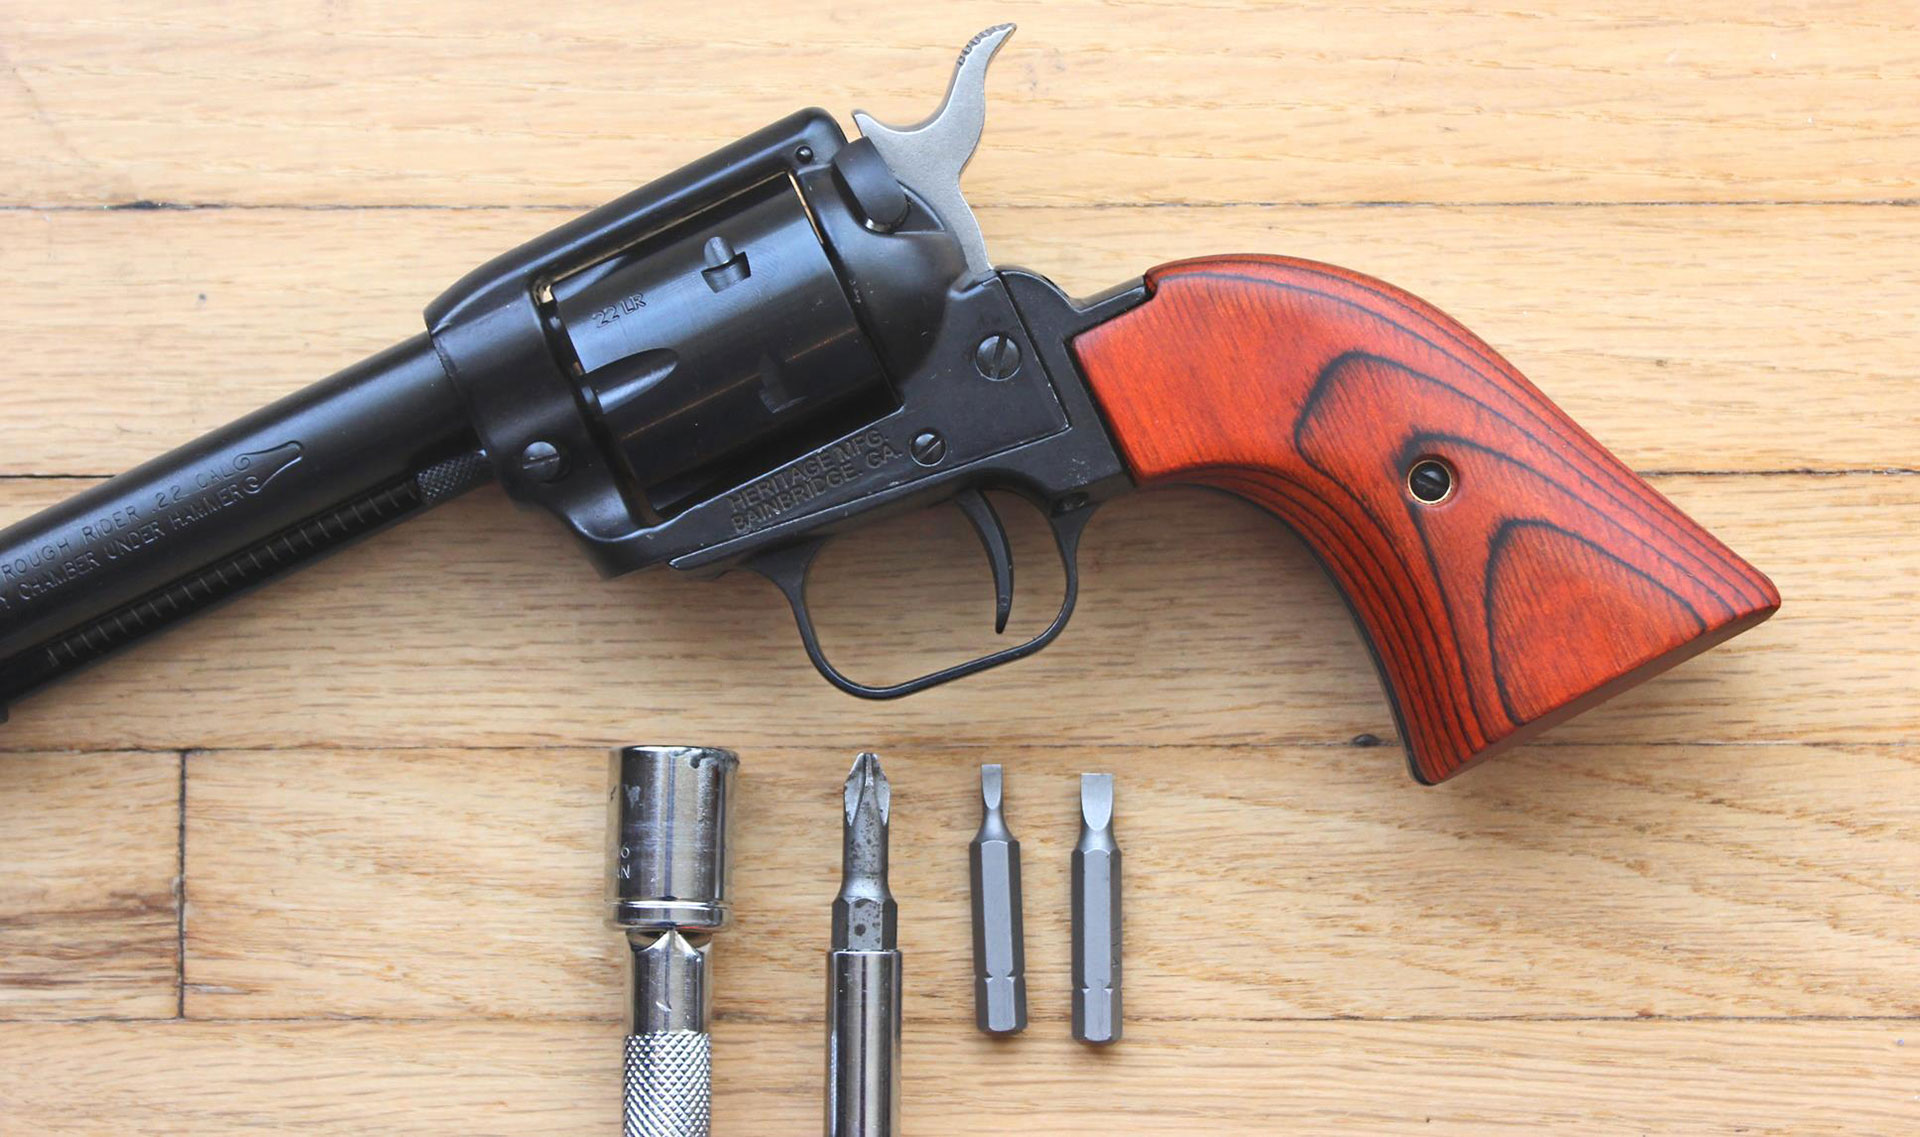 Only a simple set of hand tools is needed for converting the Long Barrel Rough Rider into a Rancher carbine.